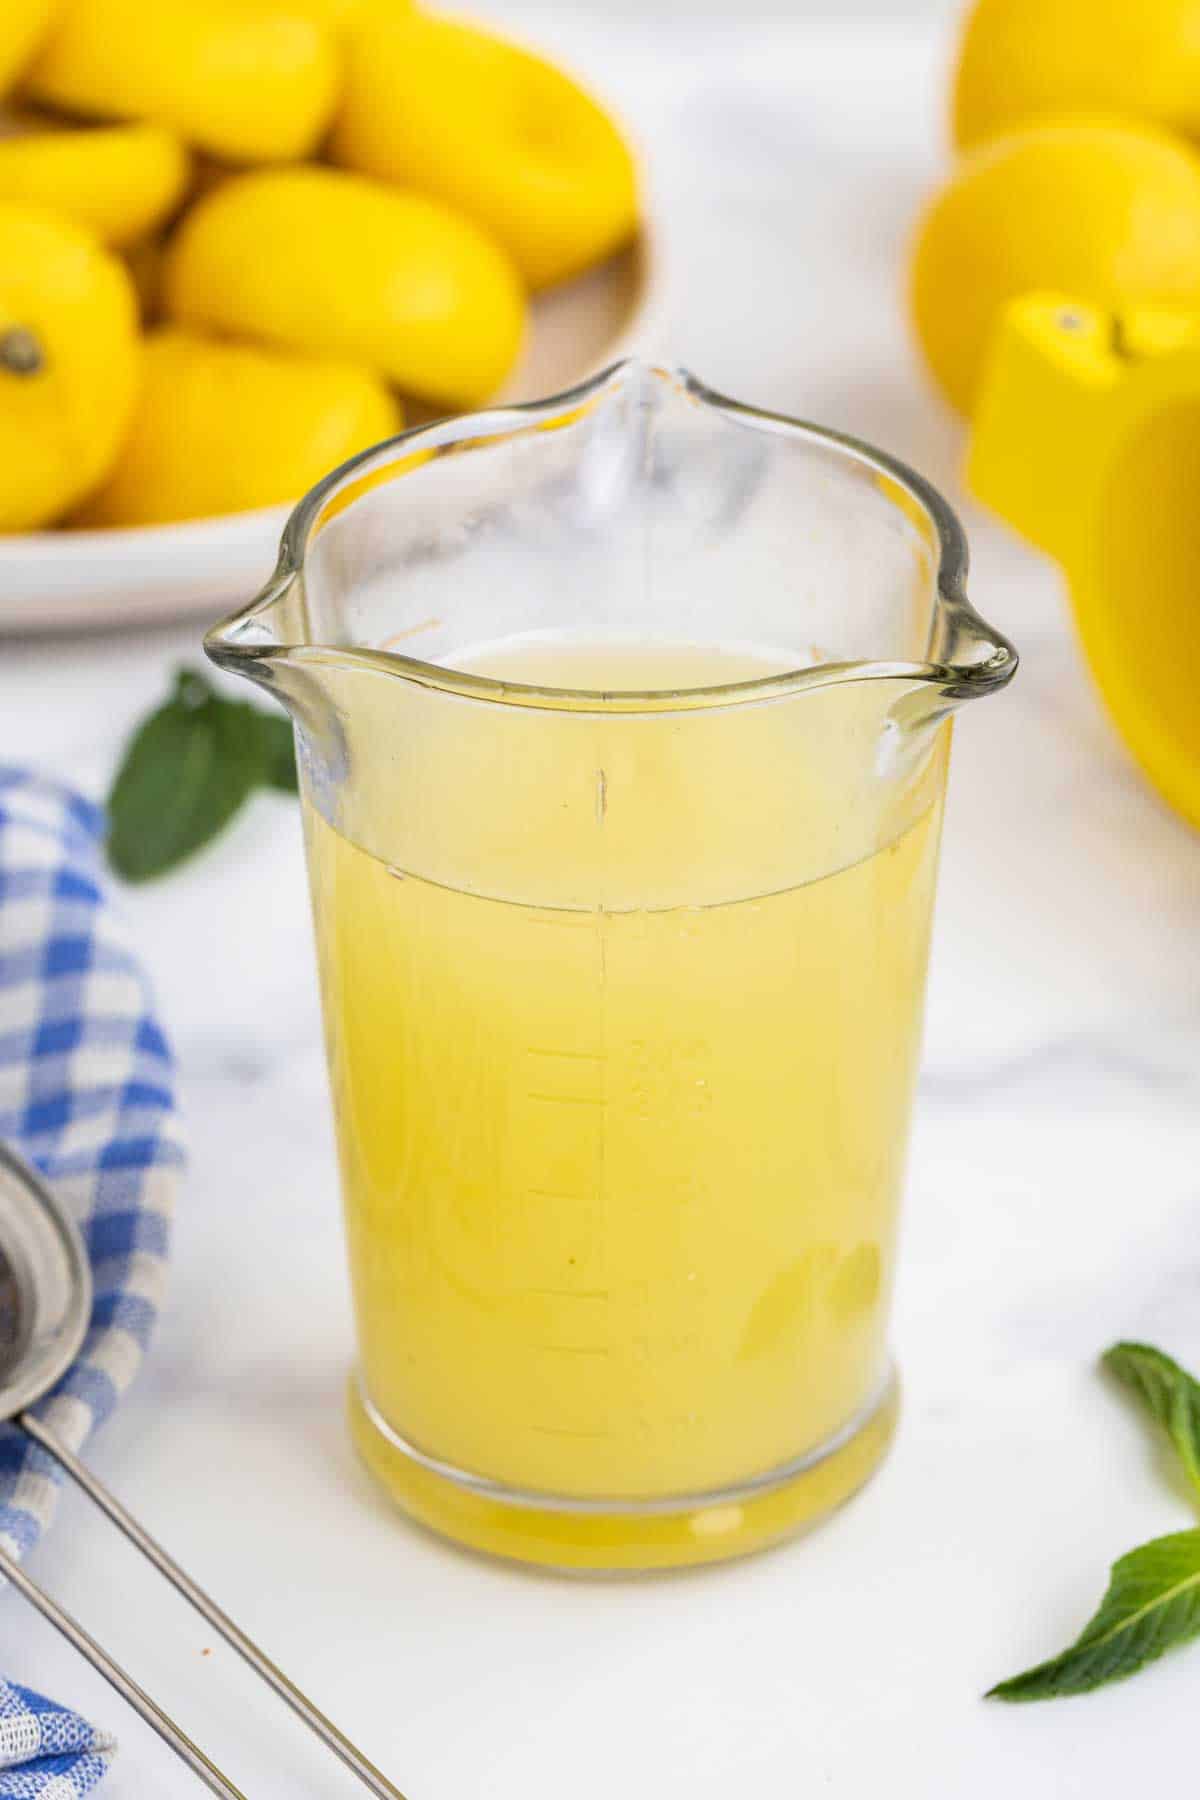 A glass pitcher filled with lemon juice, with lemons and a blue checkered cloth in the background.